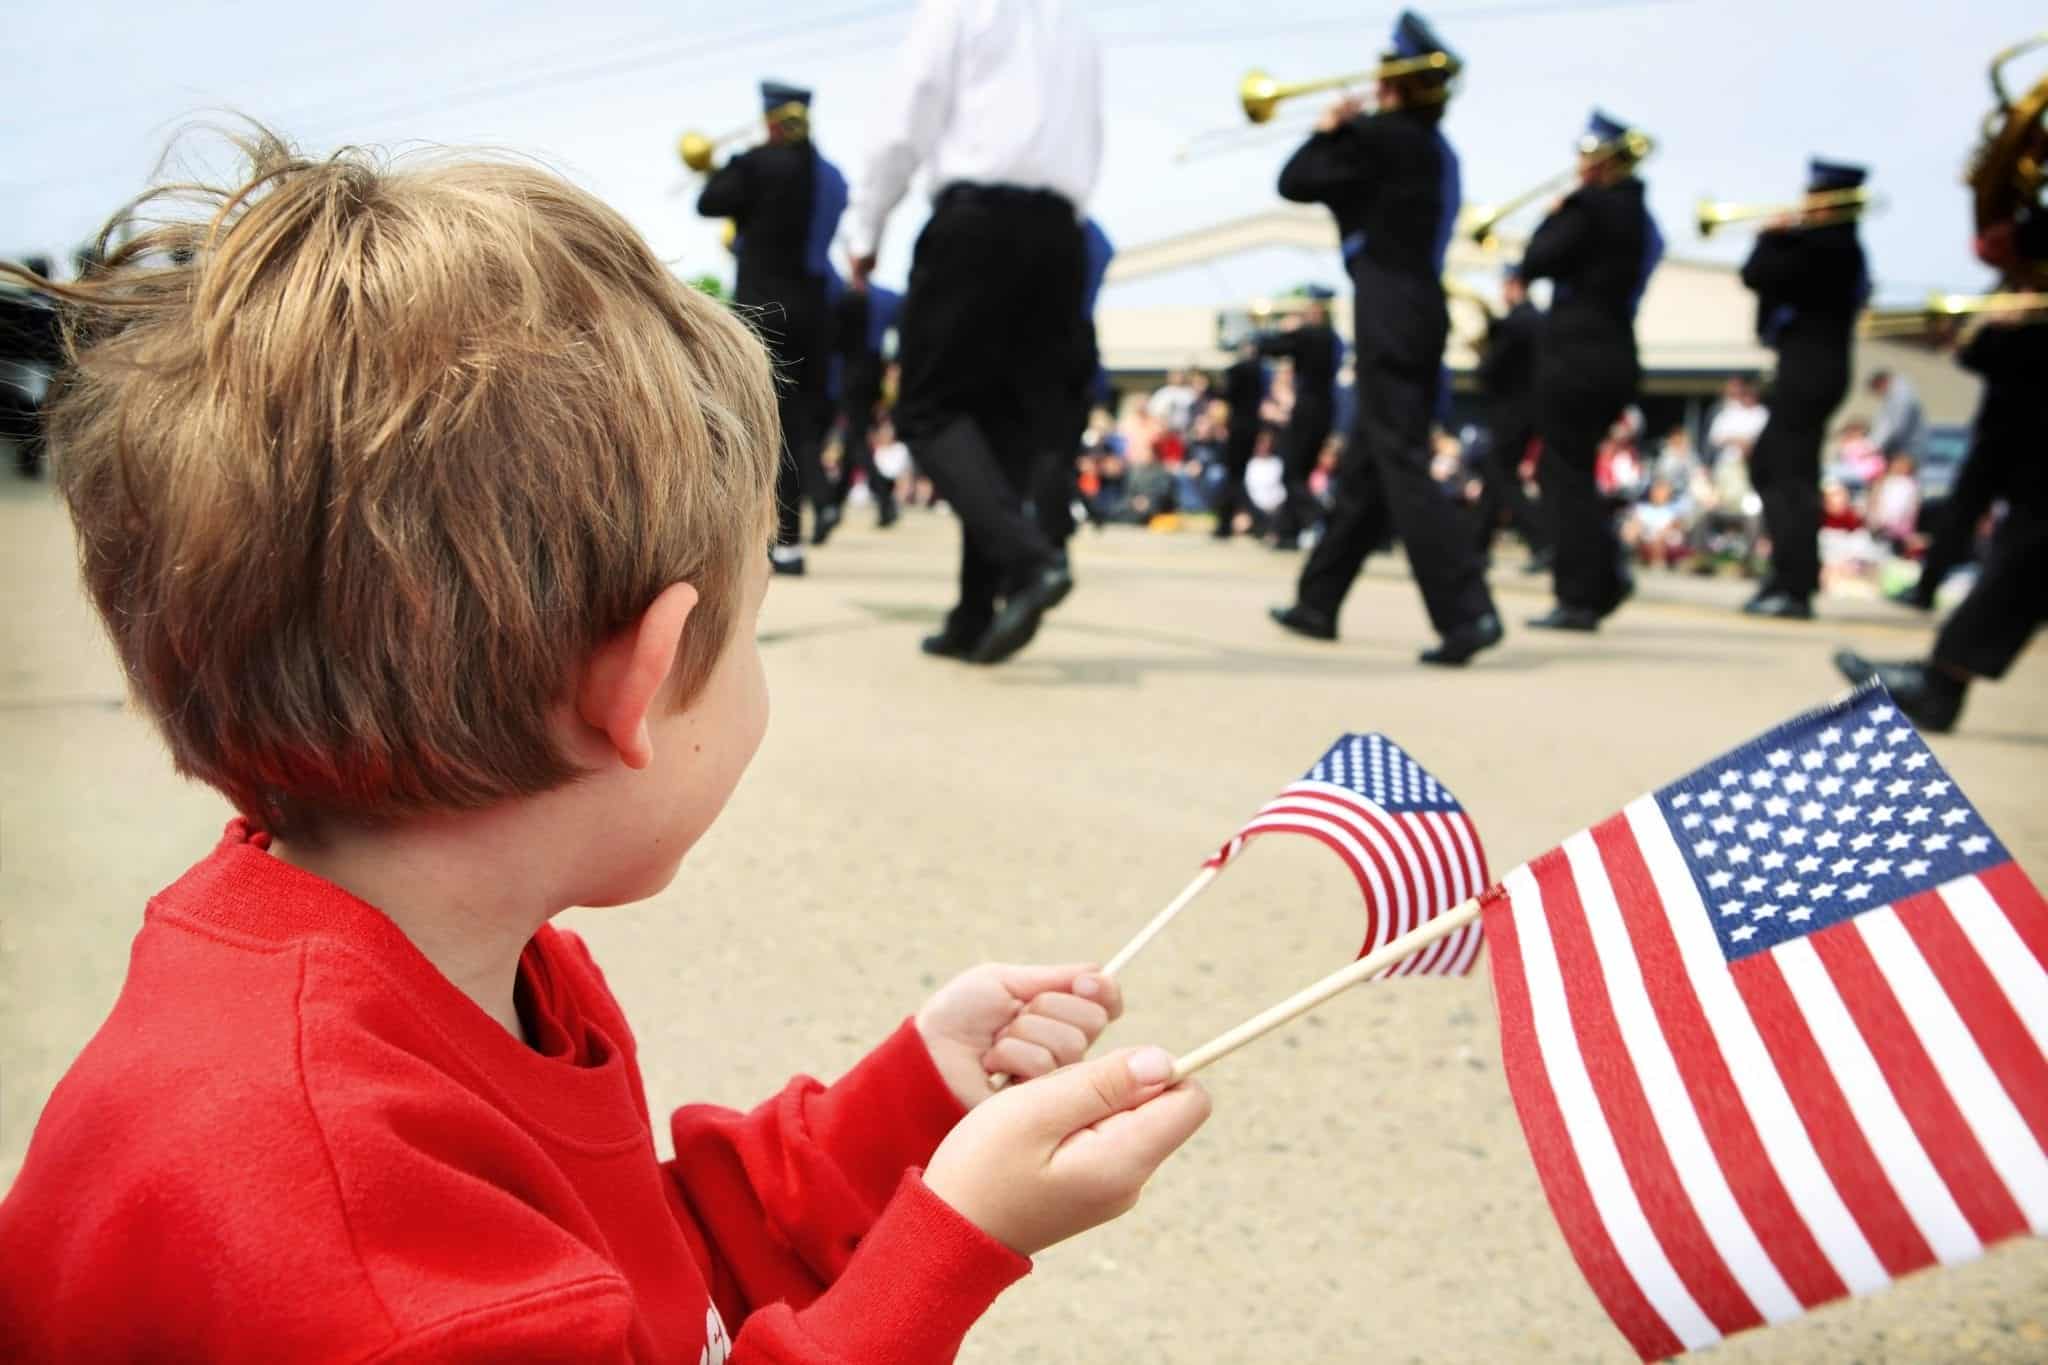 Young boy waving an American flag and watching a parade pass by